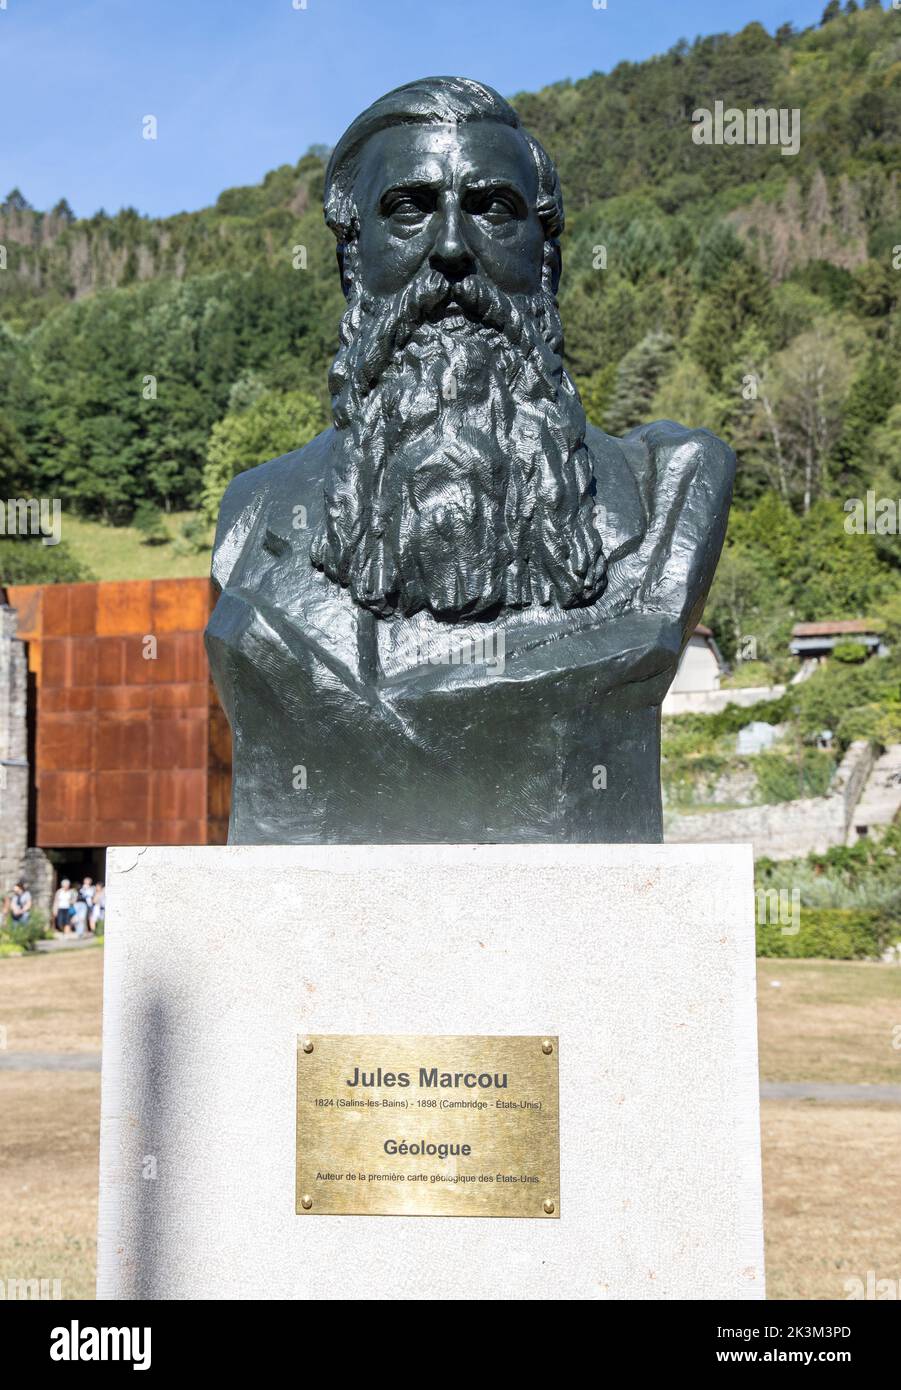 Bust of Jules Marcou, geologist and map maker, Salins-les-Bains, Jura, France Stock Photo